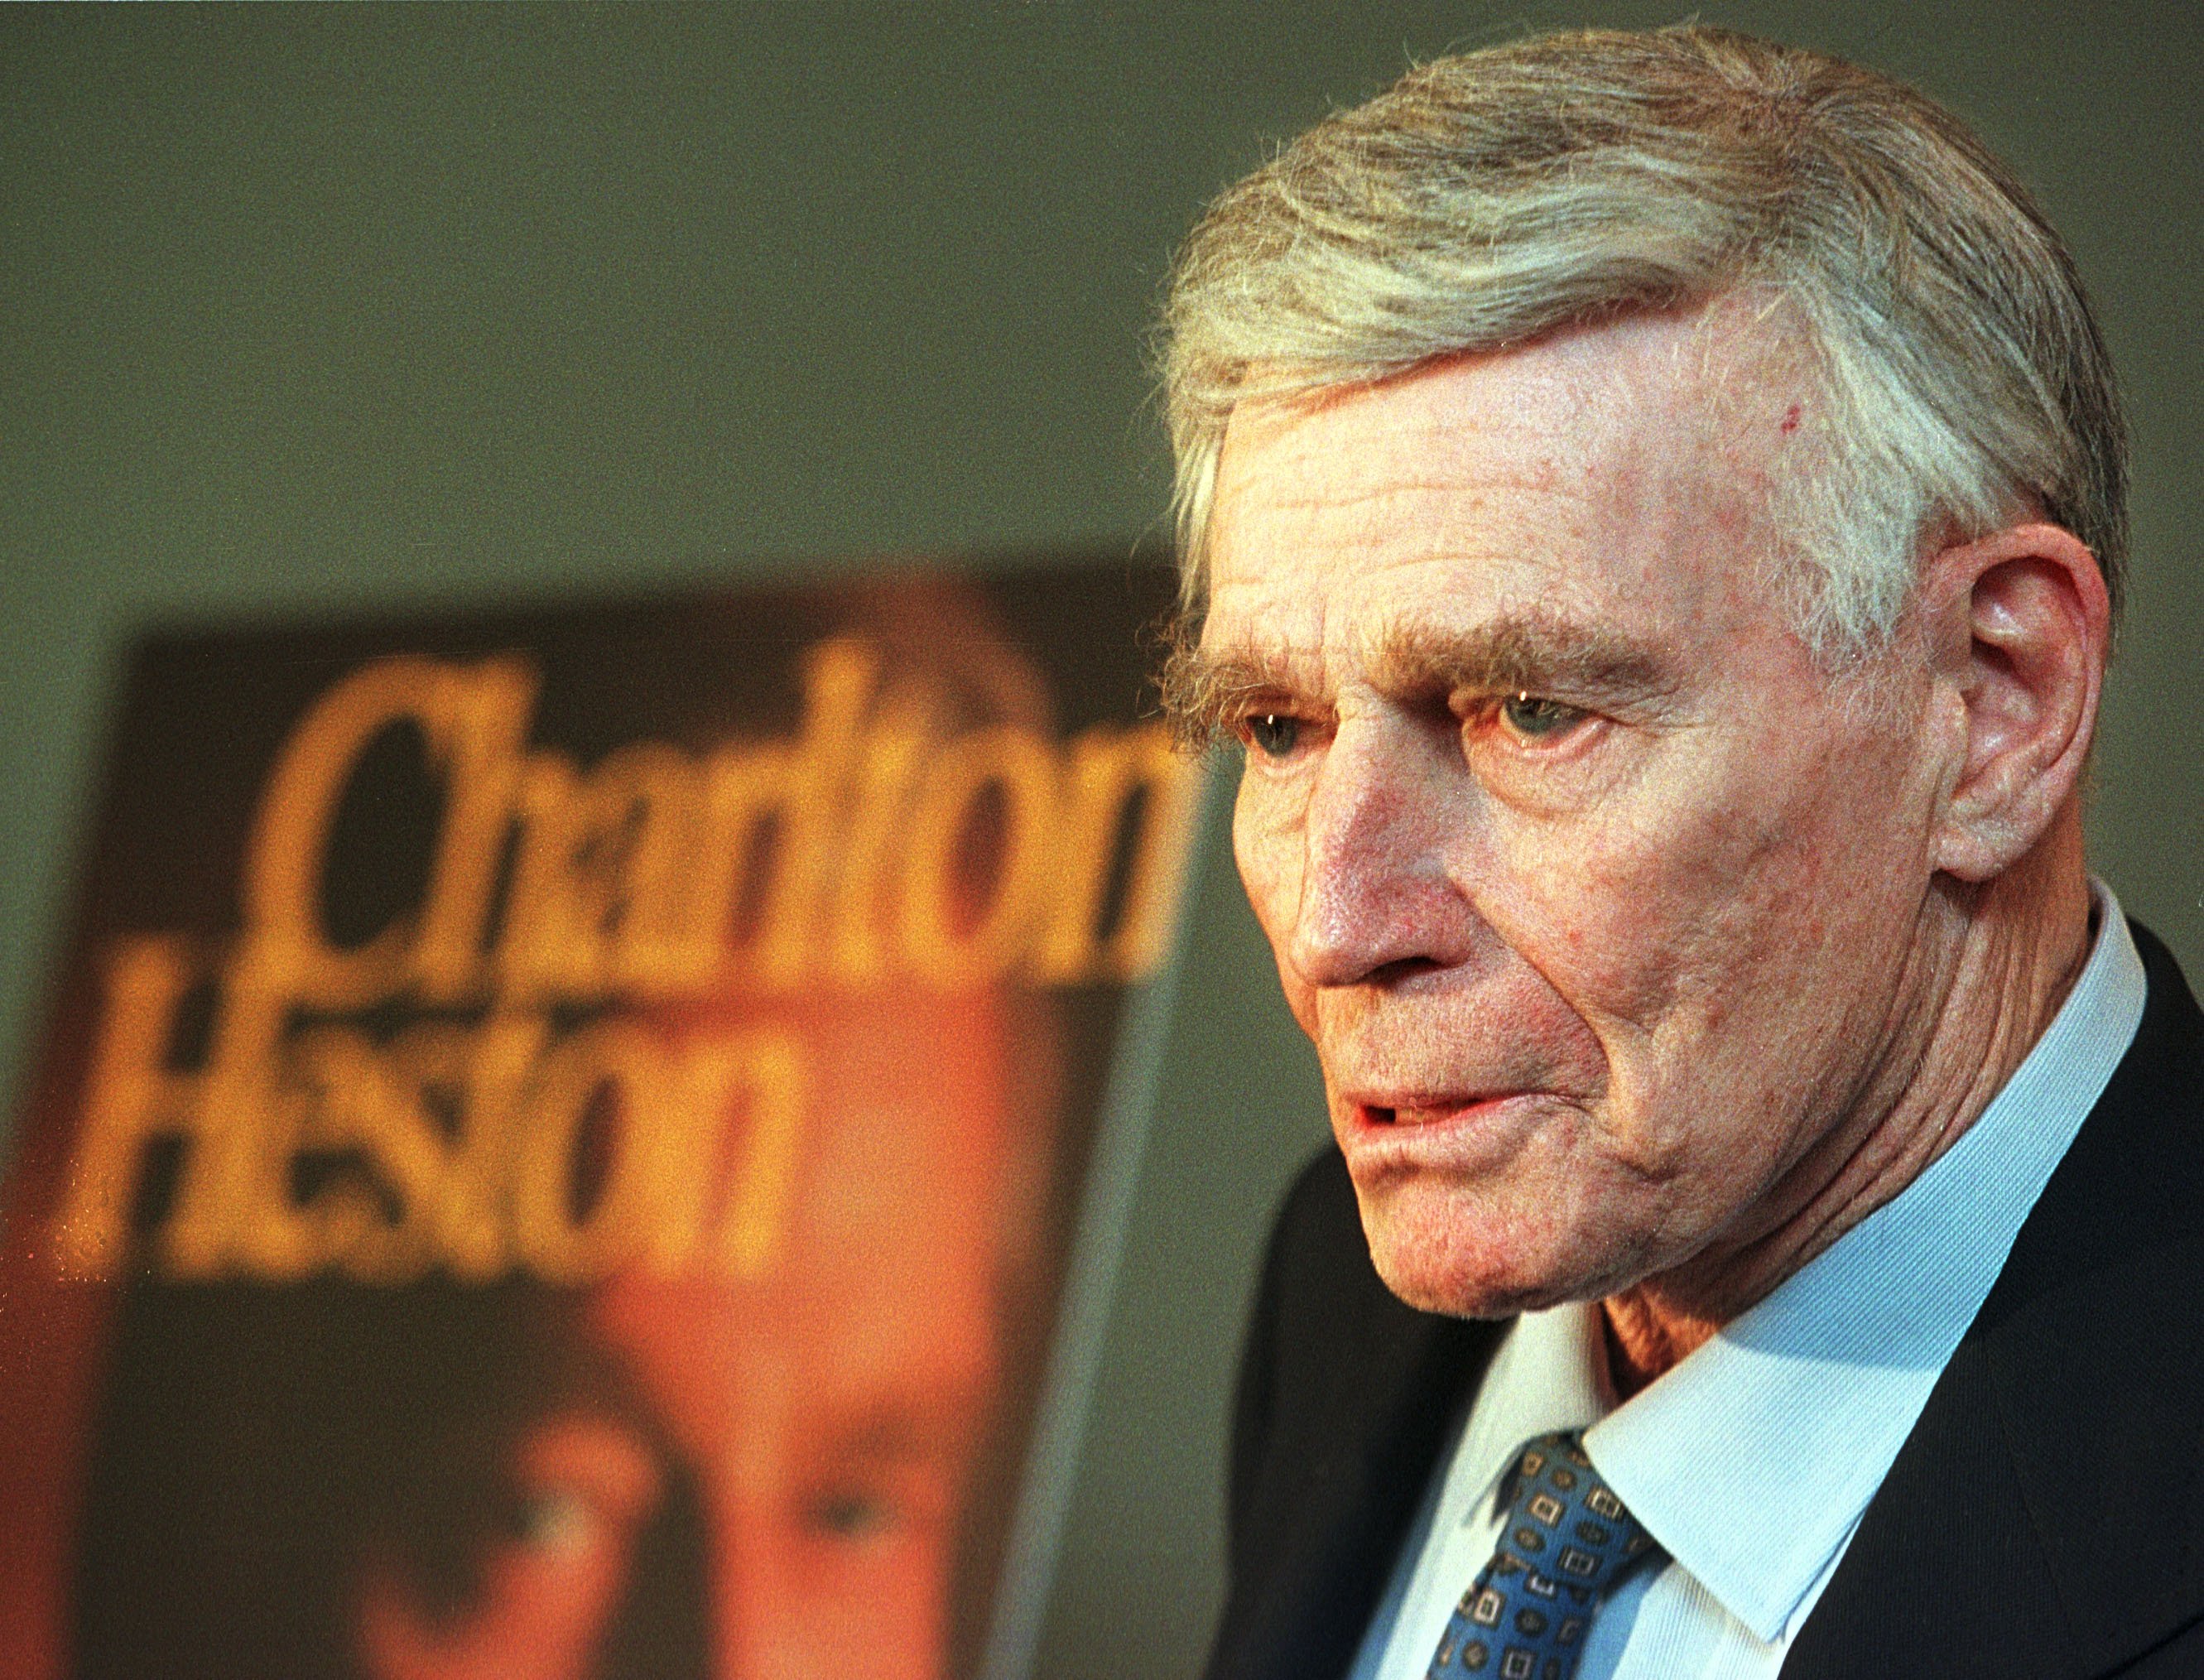 An image of actor and political activist Charlton Heston | Photo: Getty Images